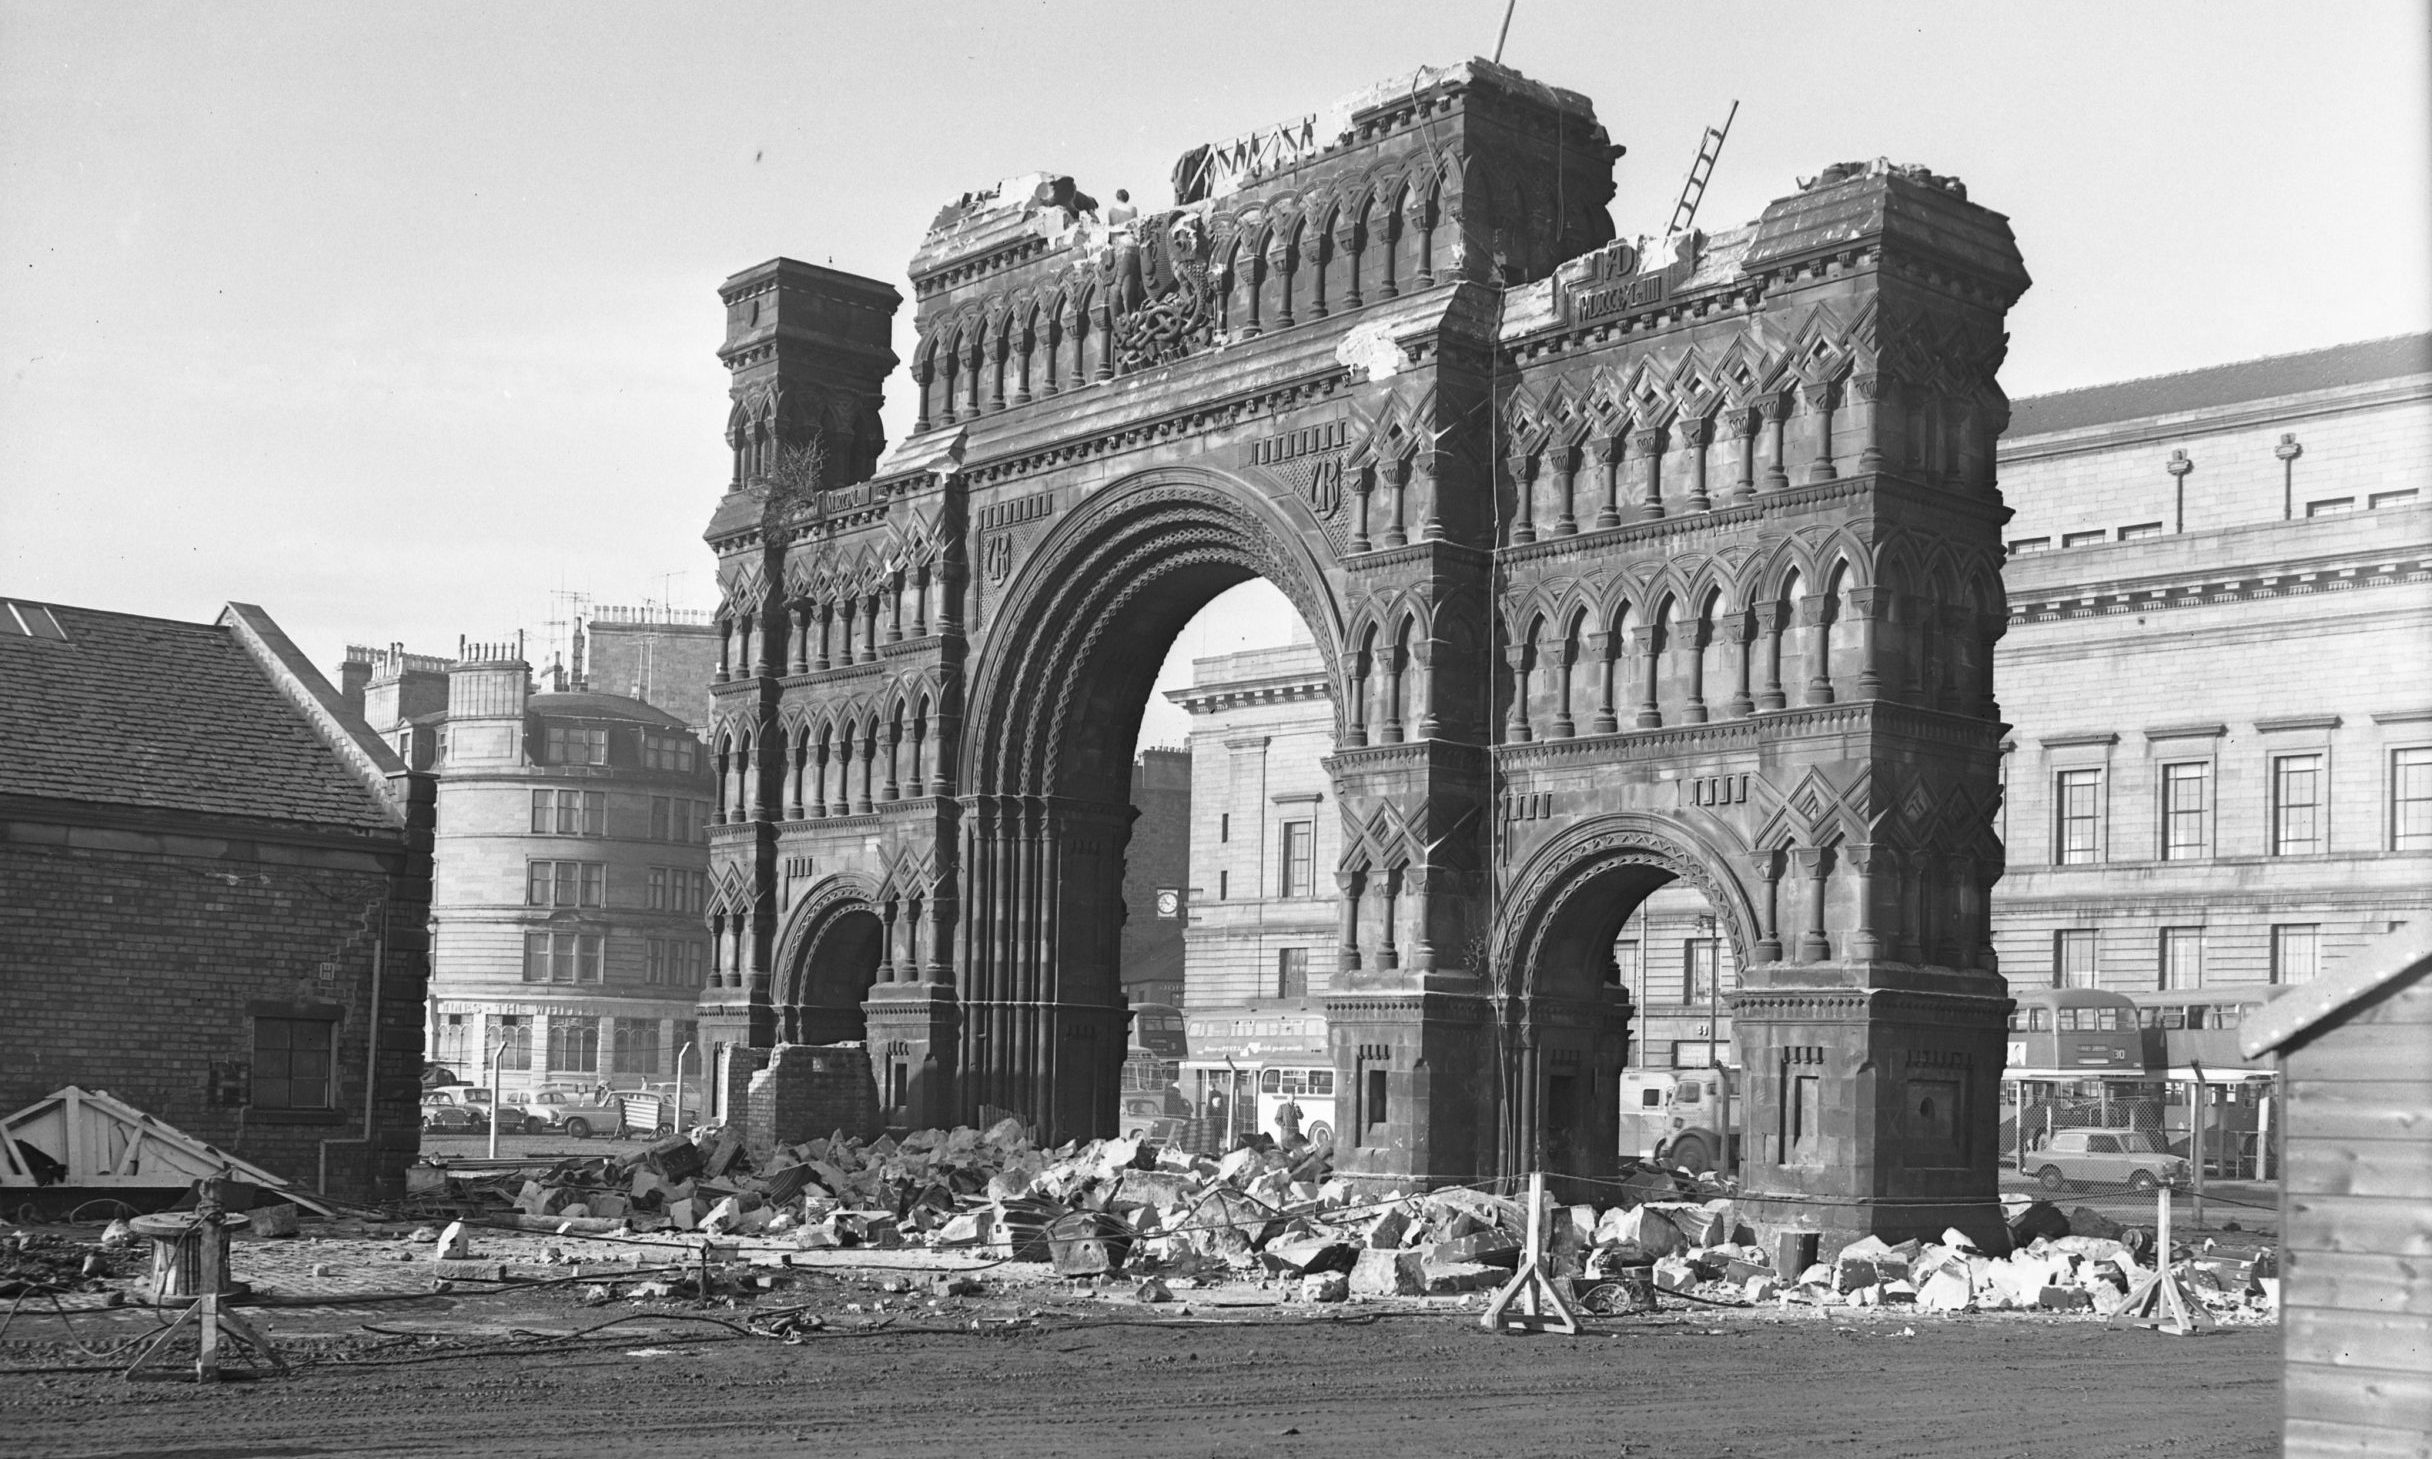 Dundee's famous Royal Arch being demolished in February 1964.